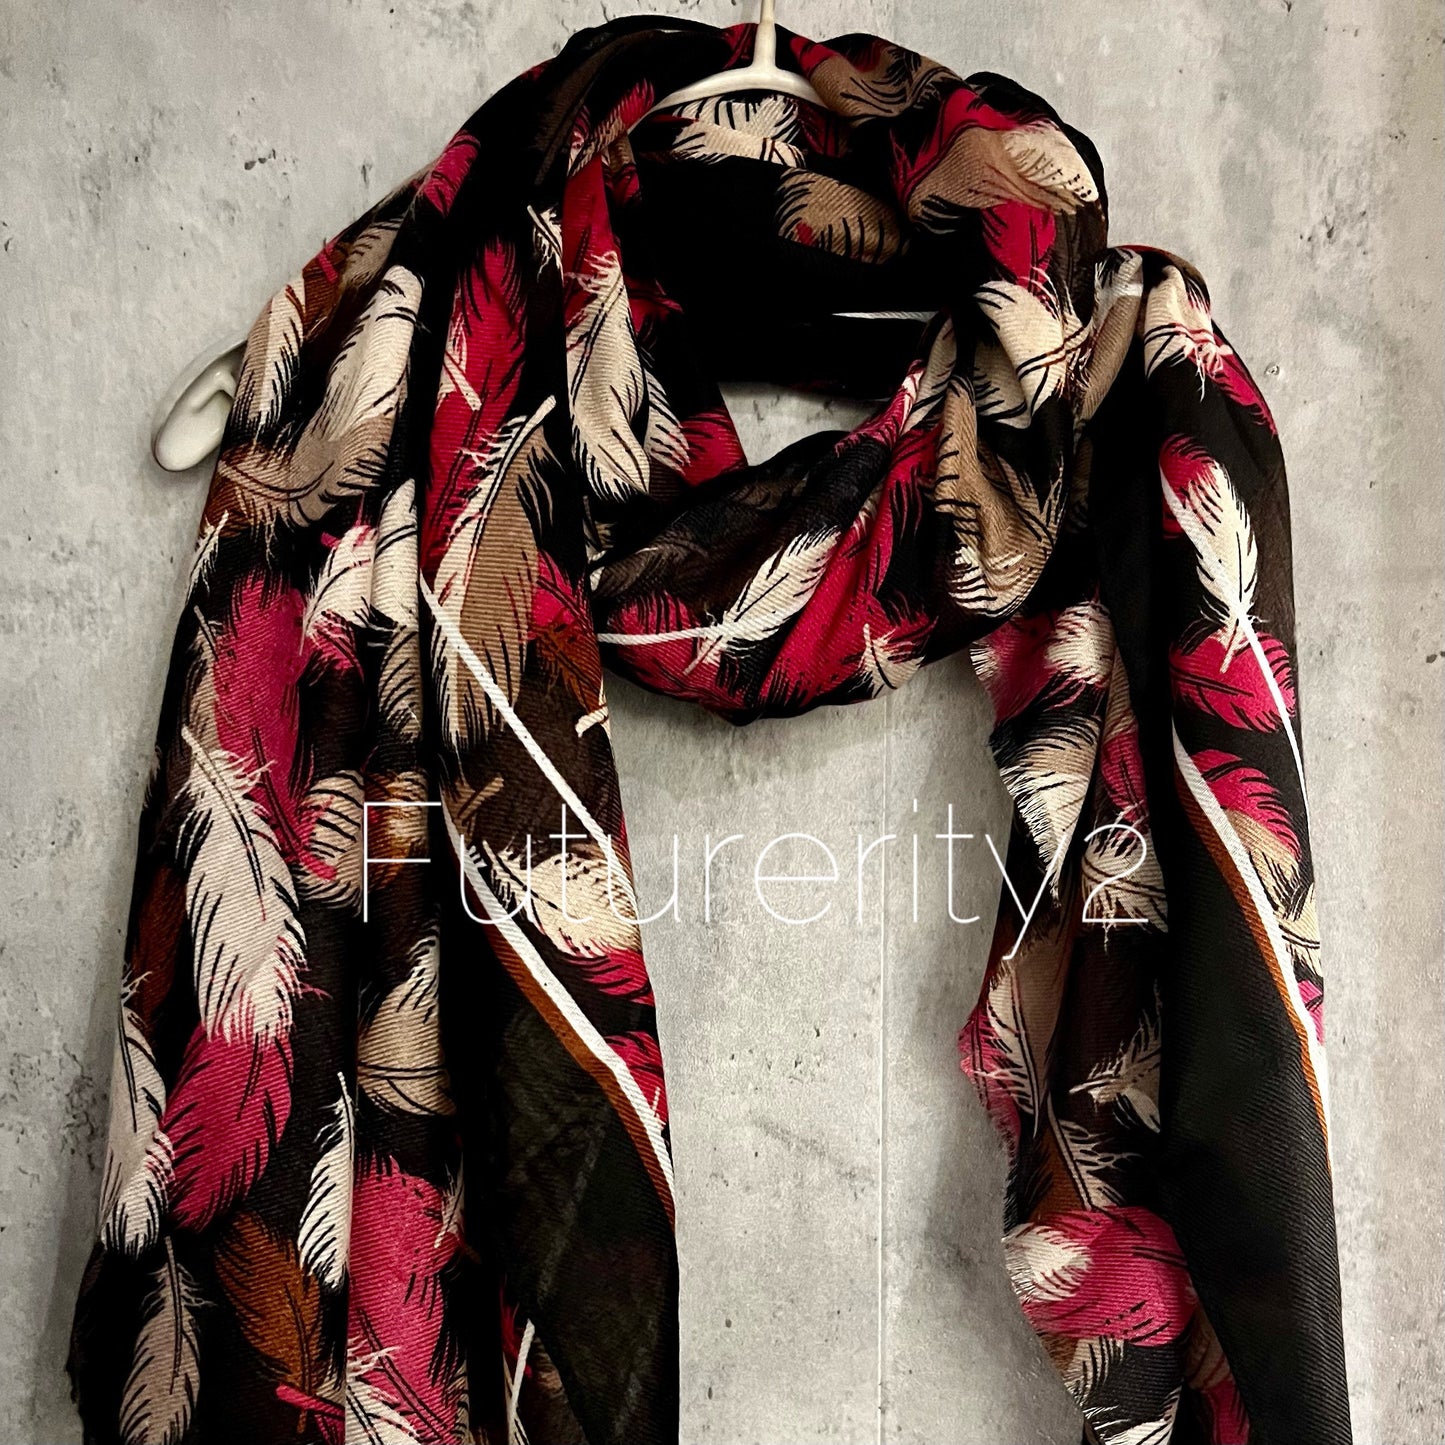 Black Cotton Scarf with Floating White Pink Feathers – A Stylish and Versatile Gift for Her